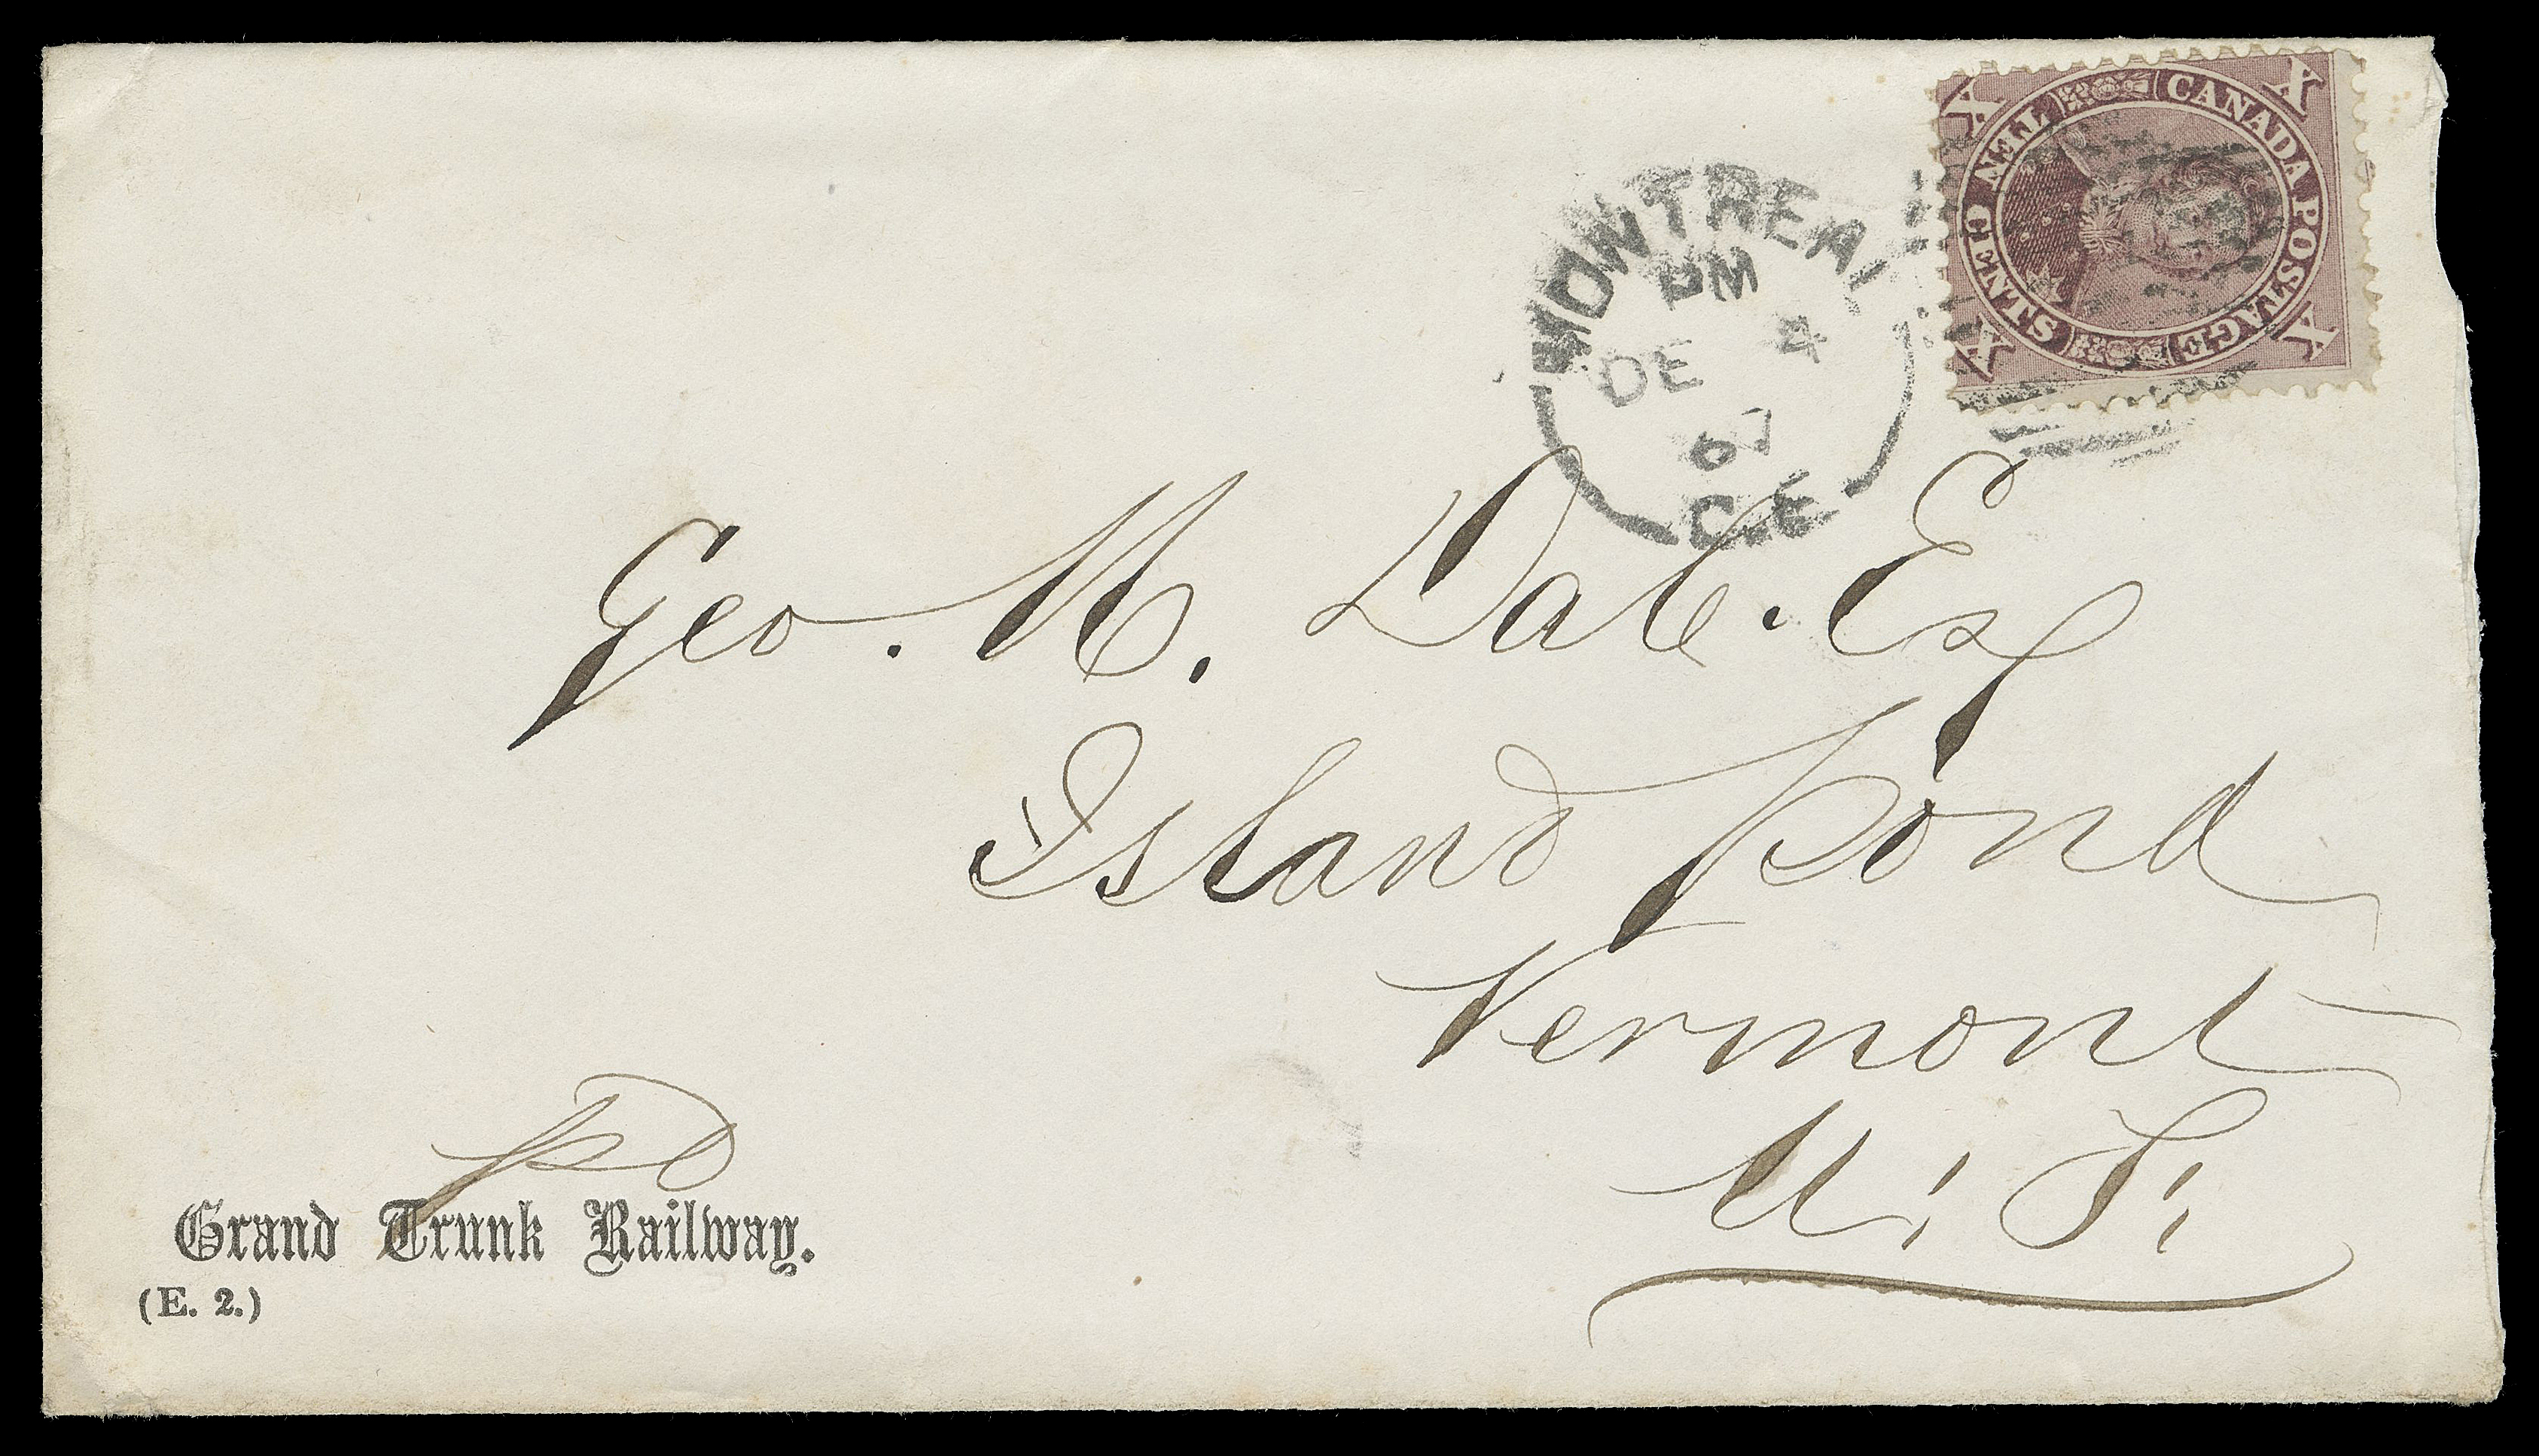 SIX PENCE AND TEN CENTS  1867 (December 4) Grand Trunk Railway imprinted white envelope, slightly reduced at right, franked with 10c brown purple, perf 12 tied by Montreal duplex, addressed to Island Pond, Vermont - which acted as a Canada - U.S. mail exchange point and a railway post office hand-over point for the mail, appealing, F-VF (Unitrade 17)